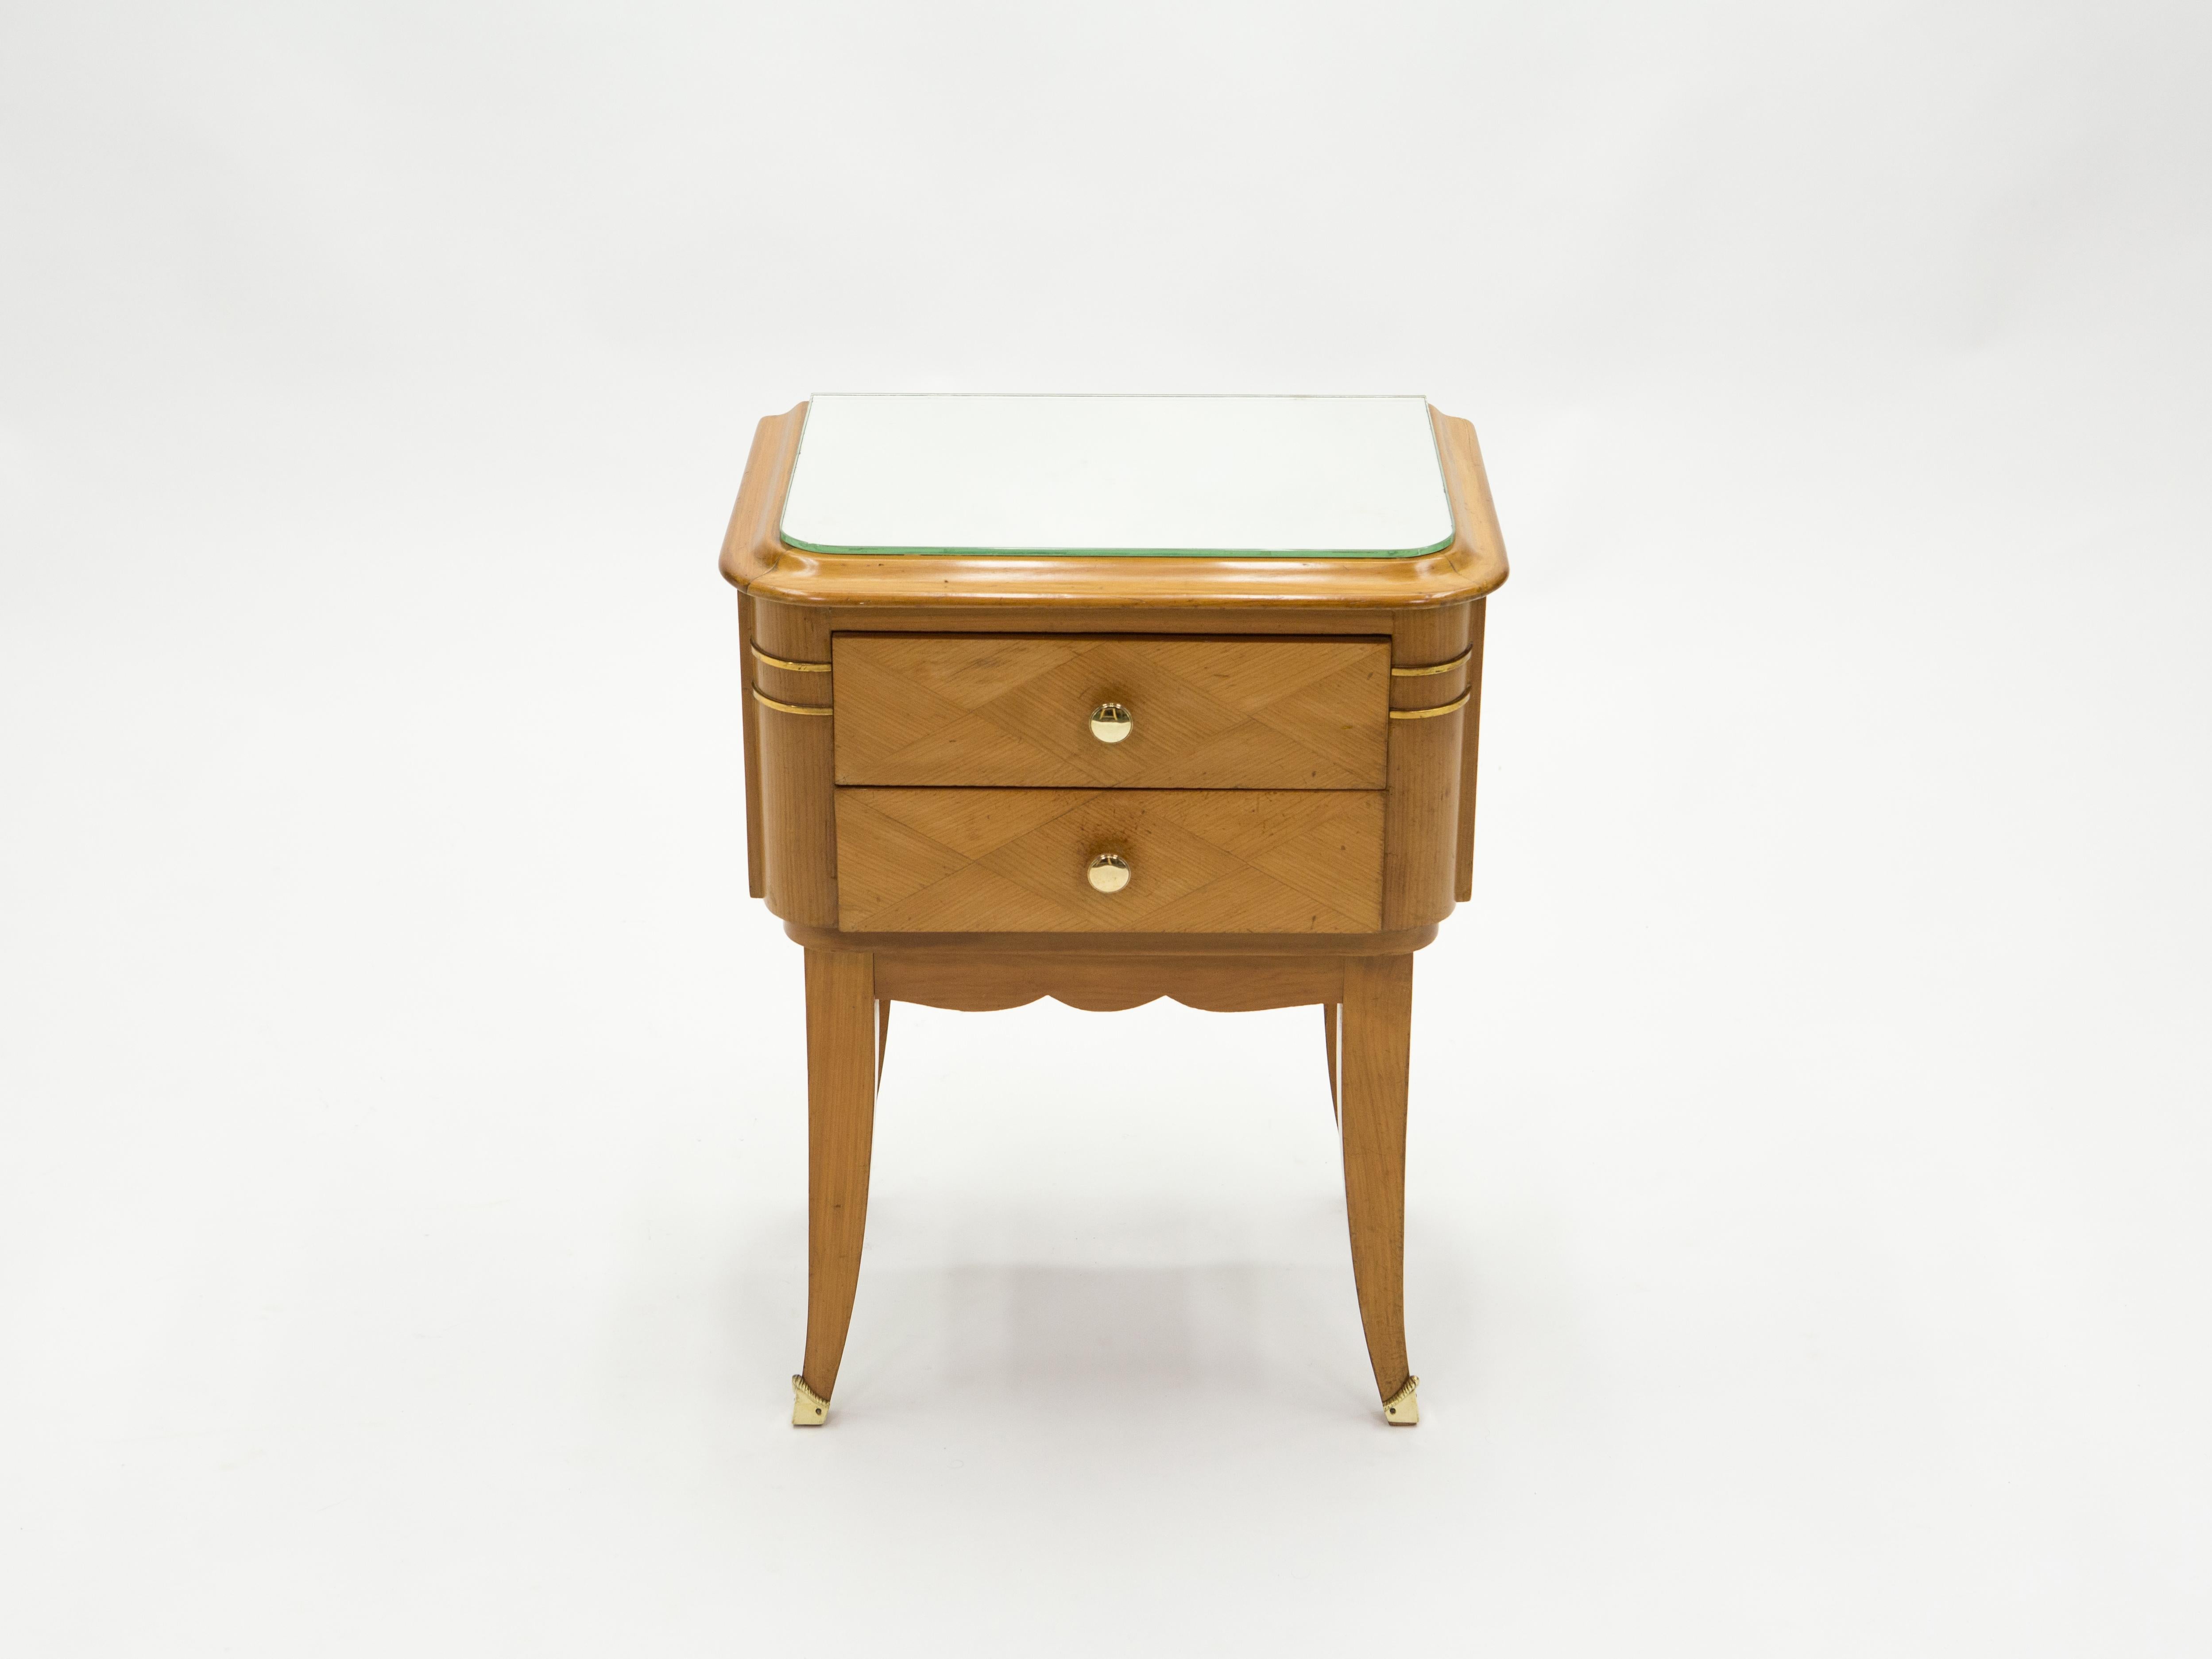 French Sycamore Brass Nightstands 2 Drawers by Jean Pascaud, 1940s For Sale 7